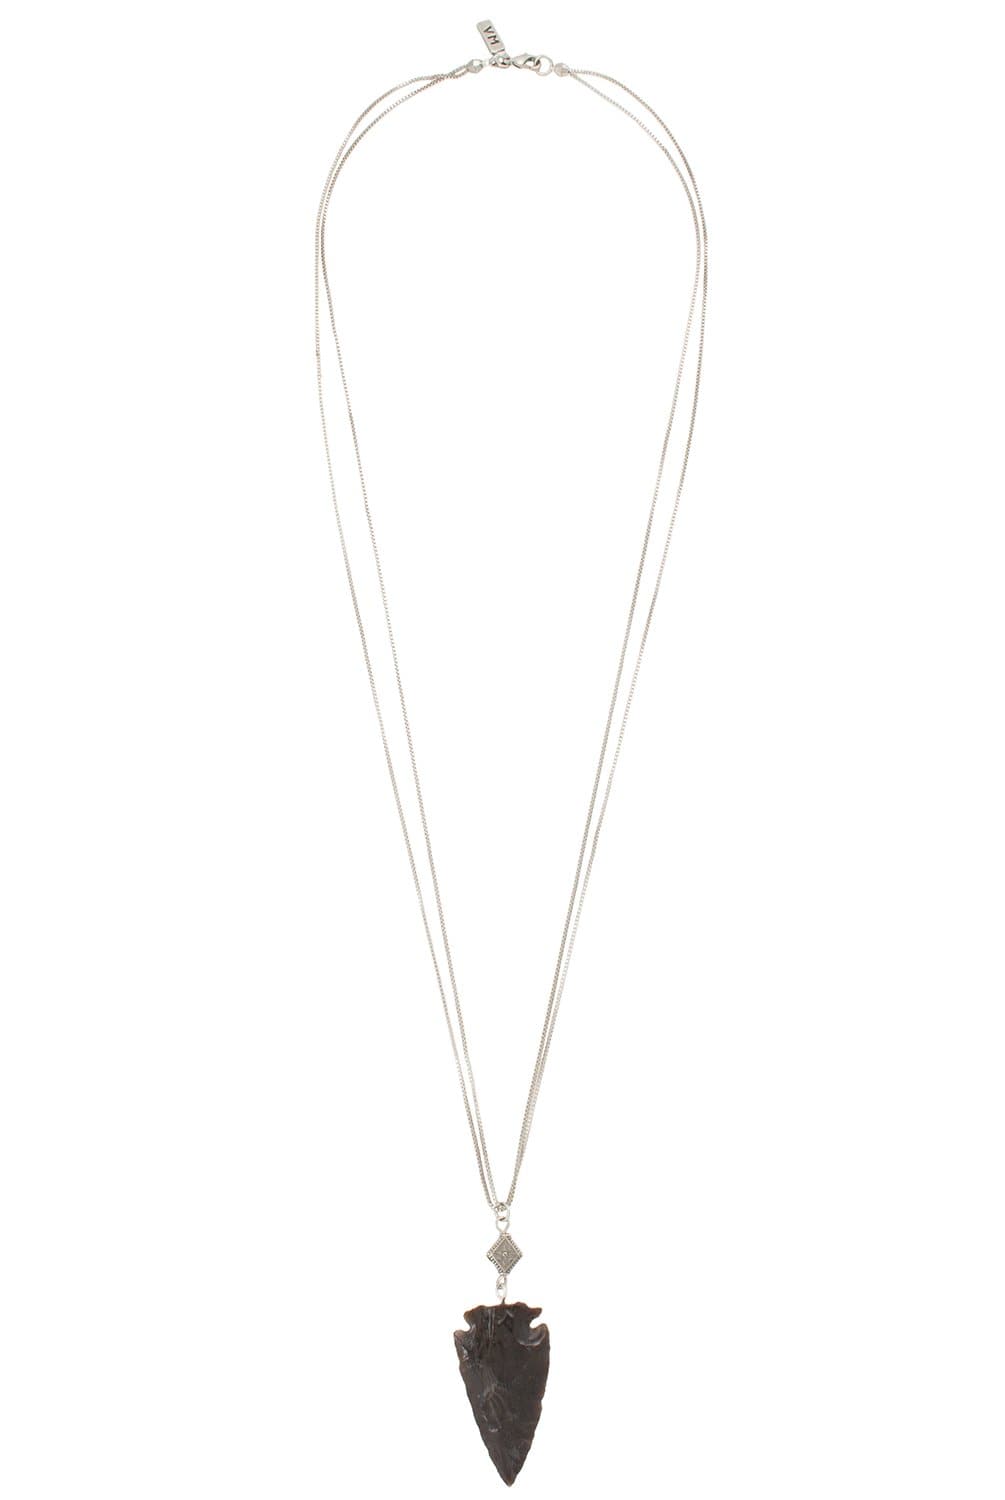 Vanessa Mooney Jewelry The Flynn Necklace in Silver